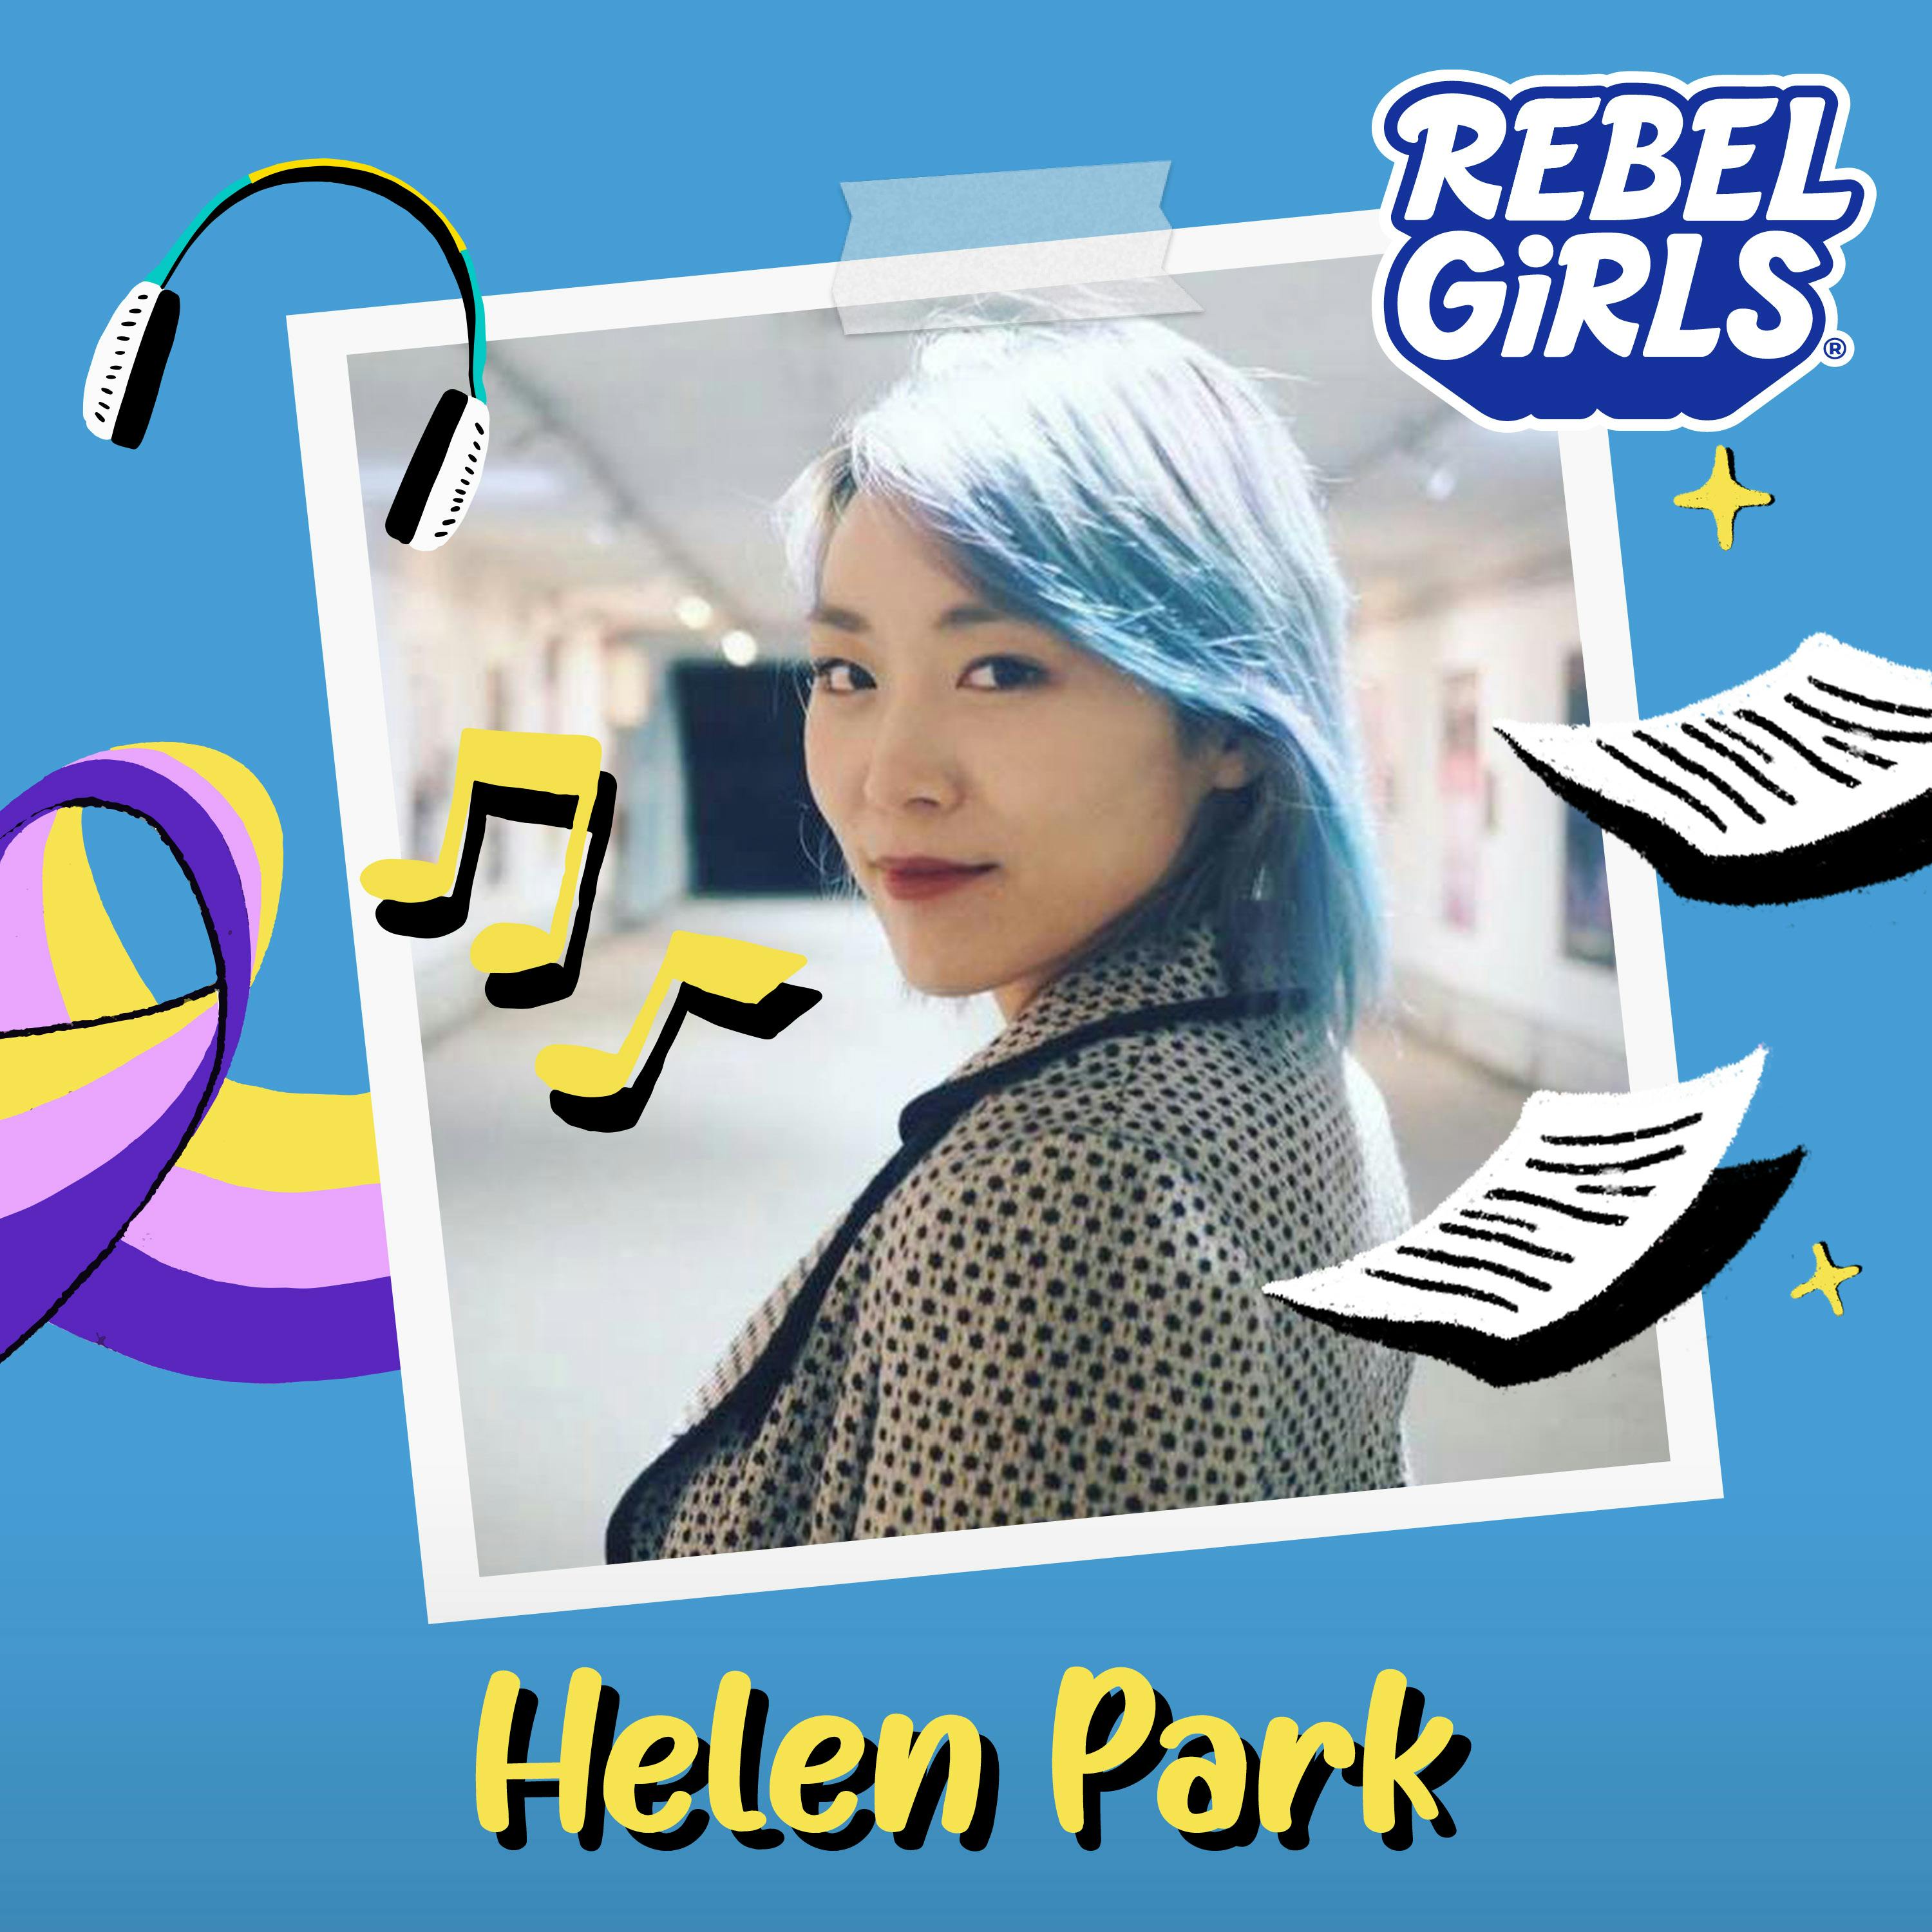 Get to Know Helen Park